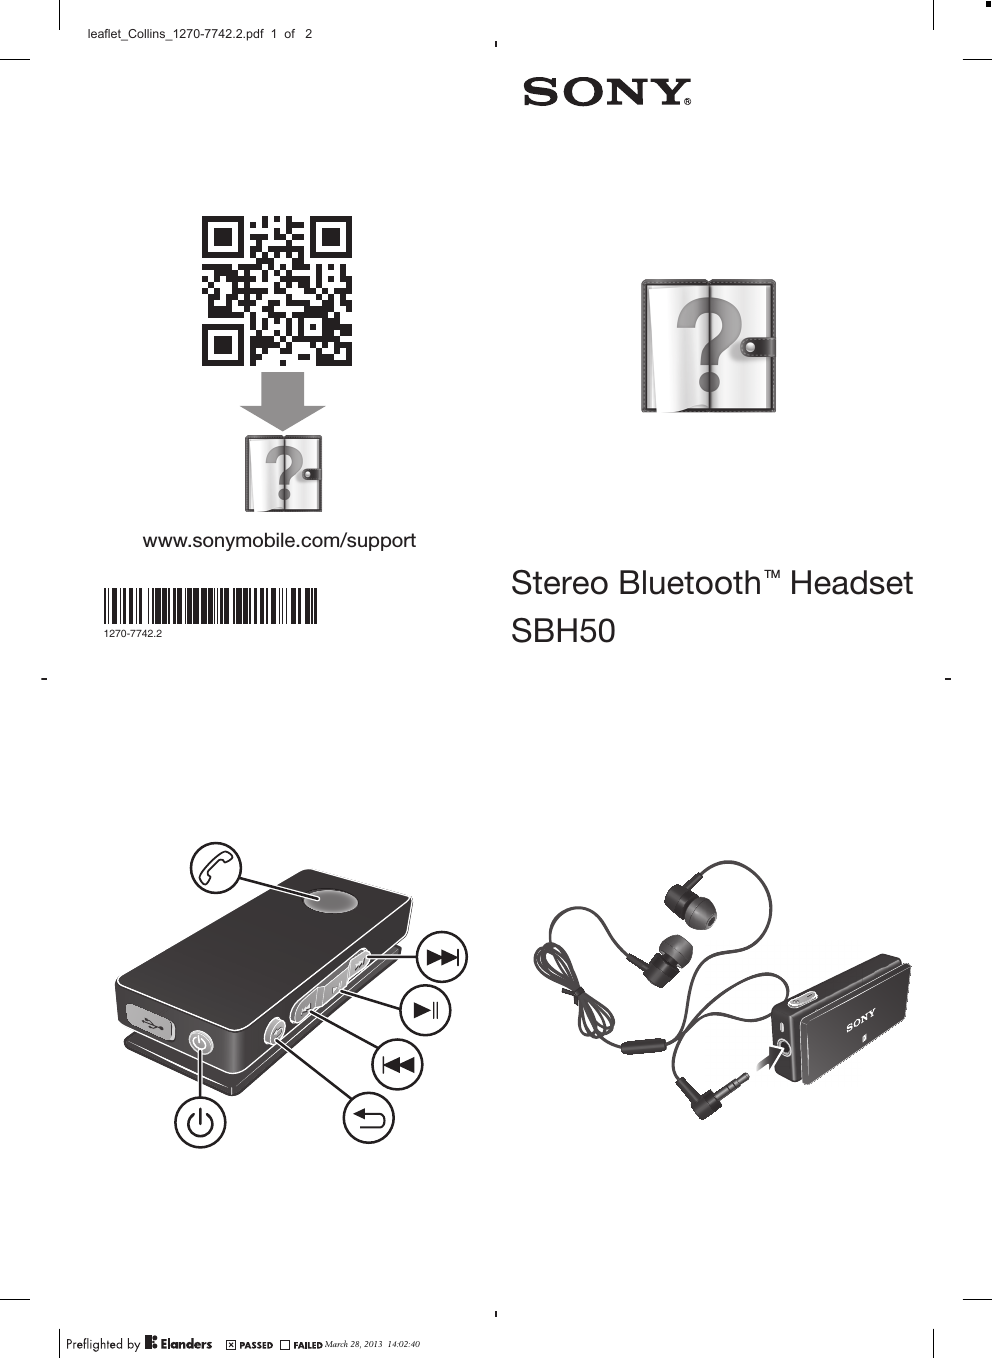 www.sonymobile.com/support1270-7742.2Stereo Bluetooth   HeadsetTMSBH50March 28, 2013  14:02:40leaflet_Collins_1270-7742.2.pdf  1  of   2